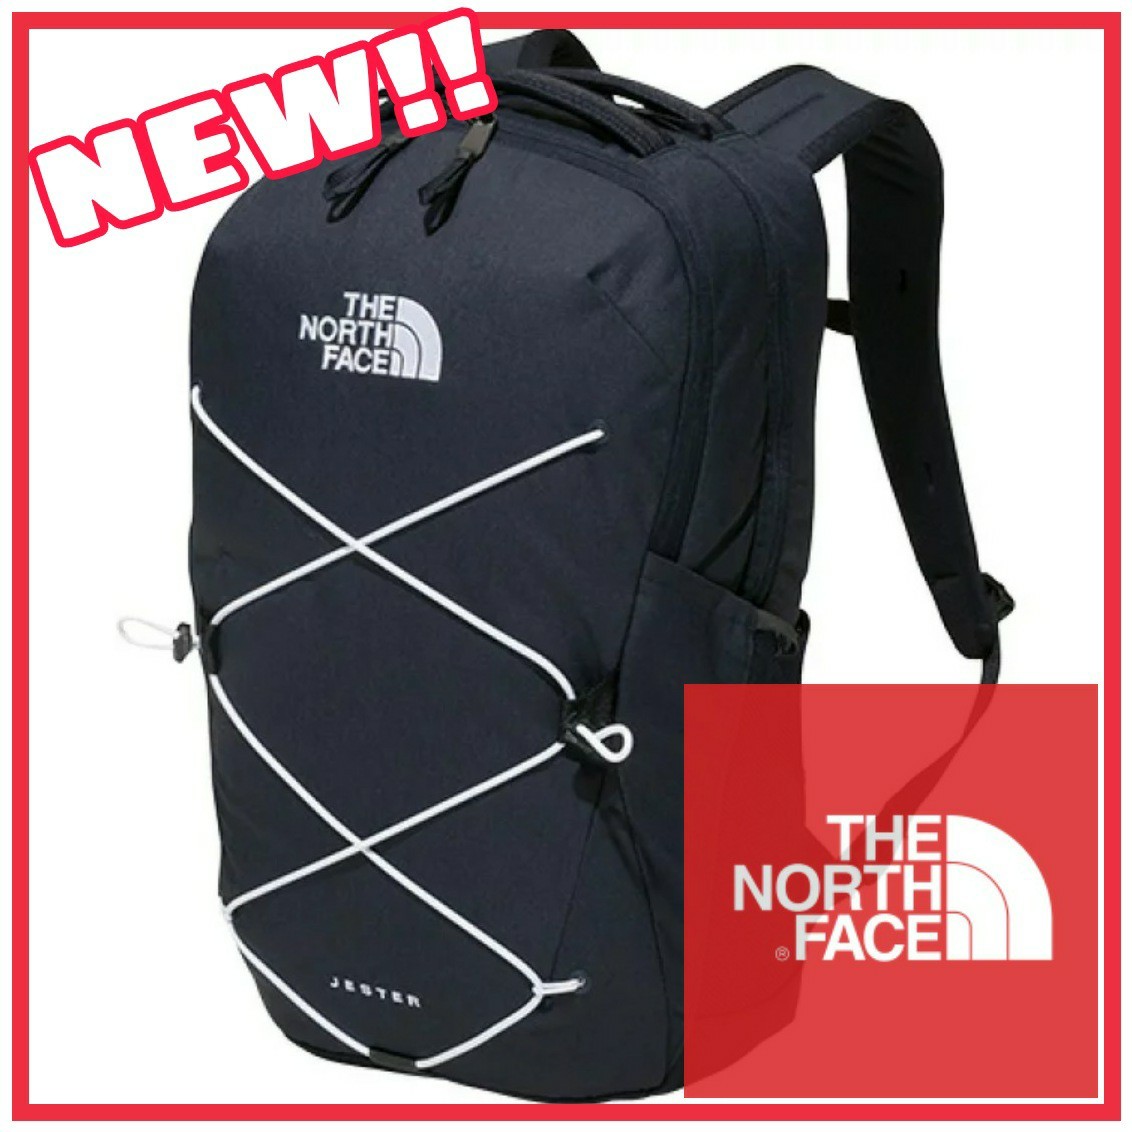 THE NORTH FACE バックパック ジェスター リュック